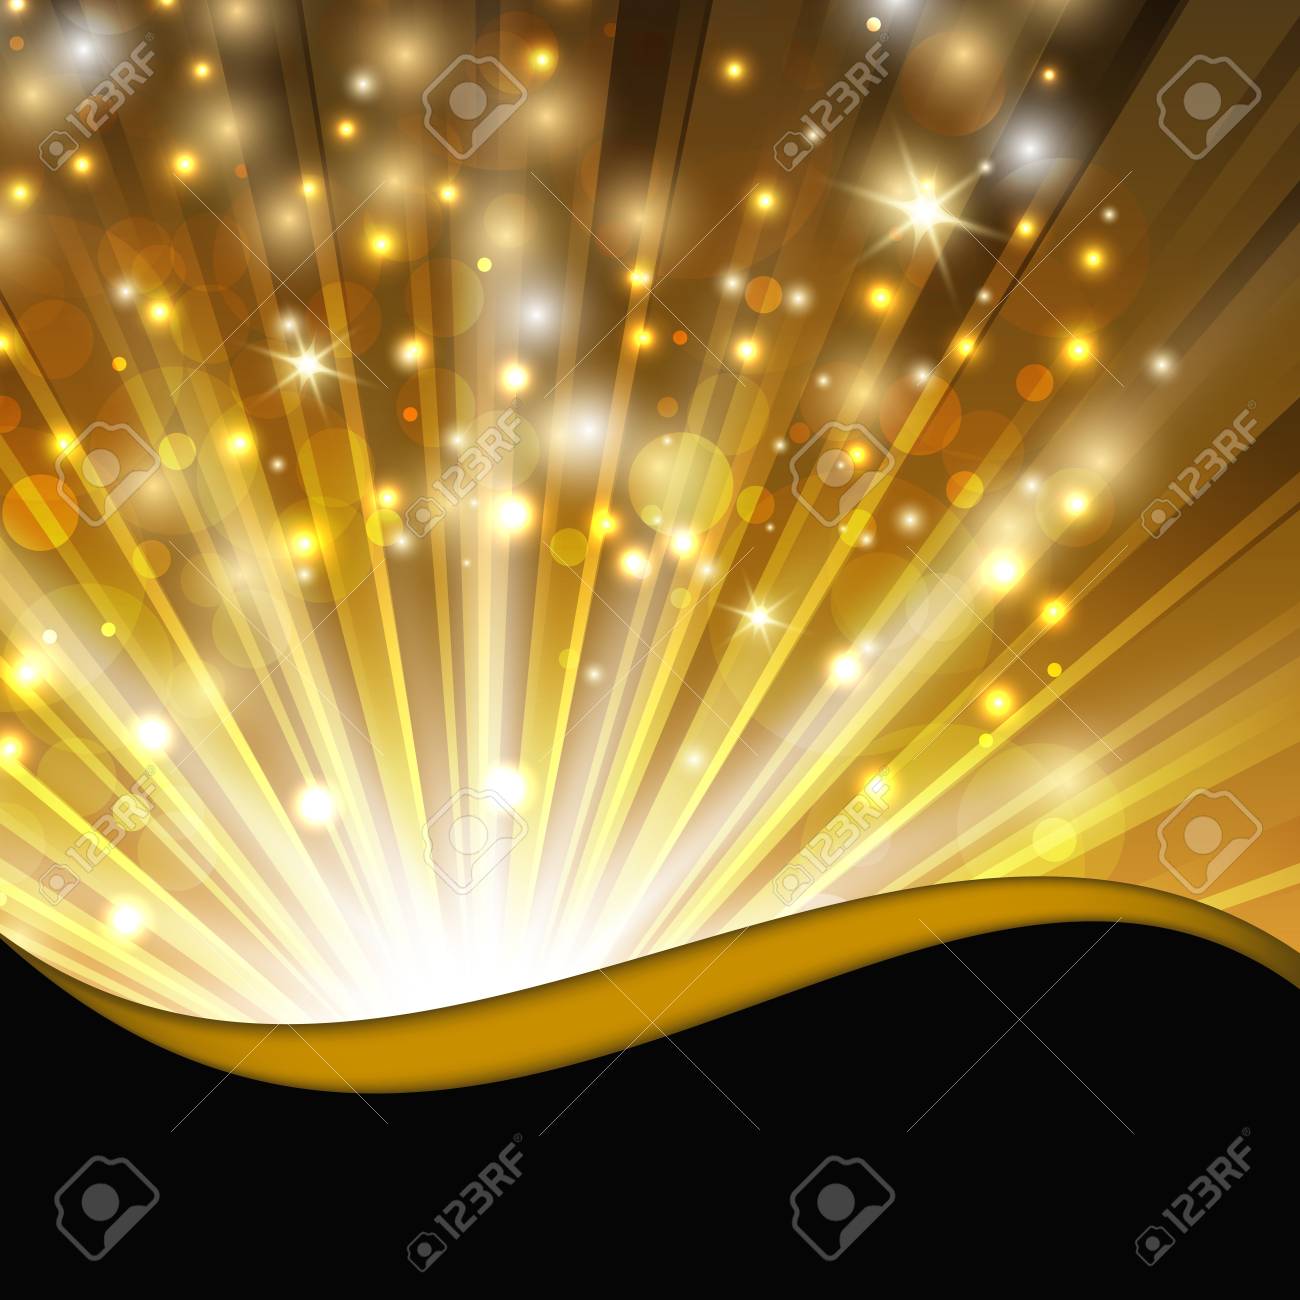 Abstract Shimmering Background With Magic Lights And Decorative